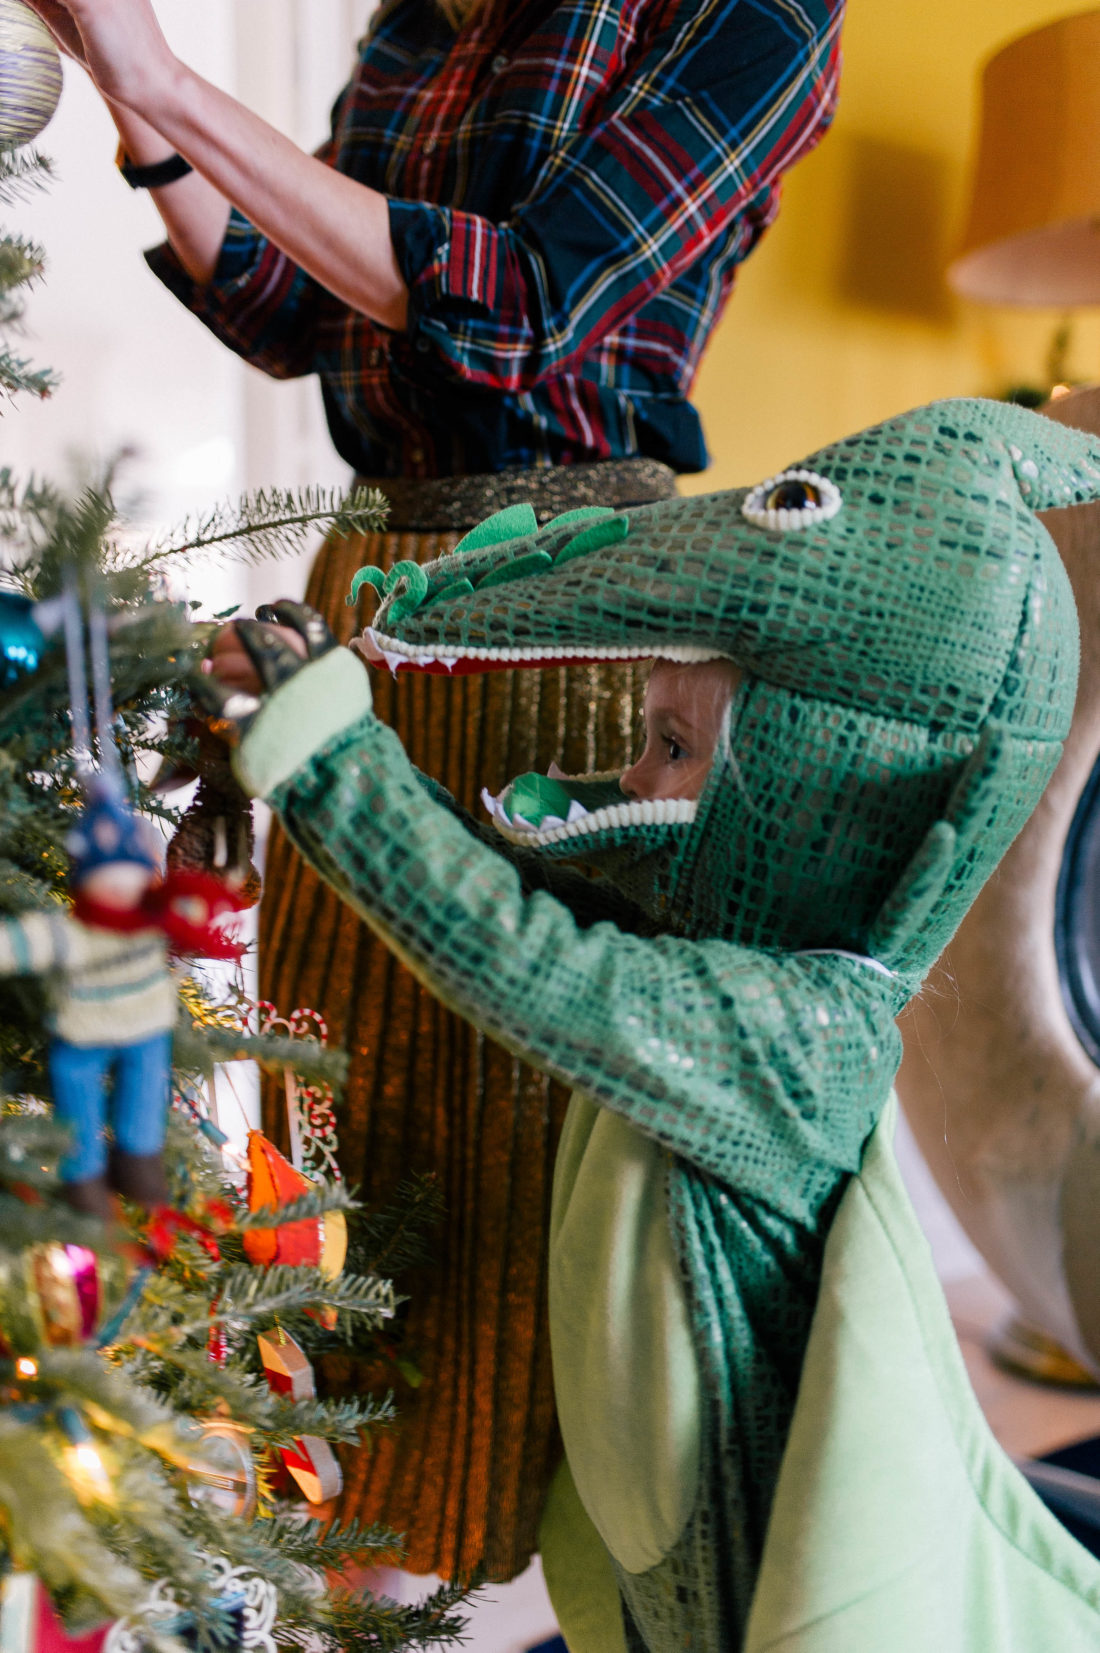 Marlowe Martino dresses up in a dragon costume and decorates the christmas tree